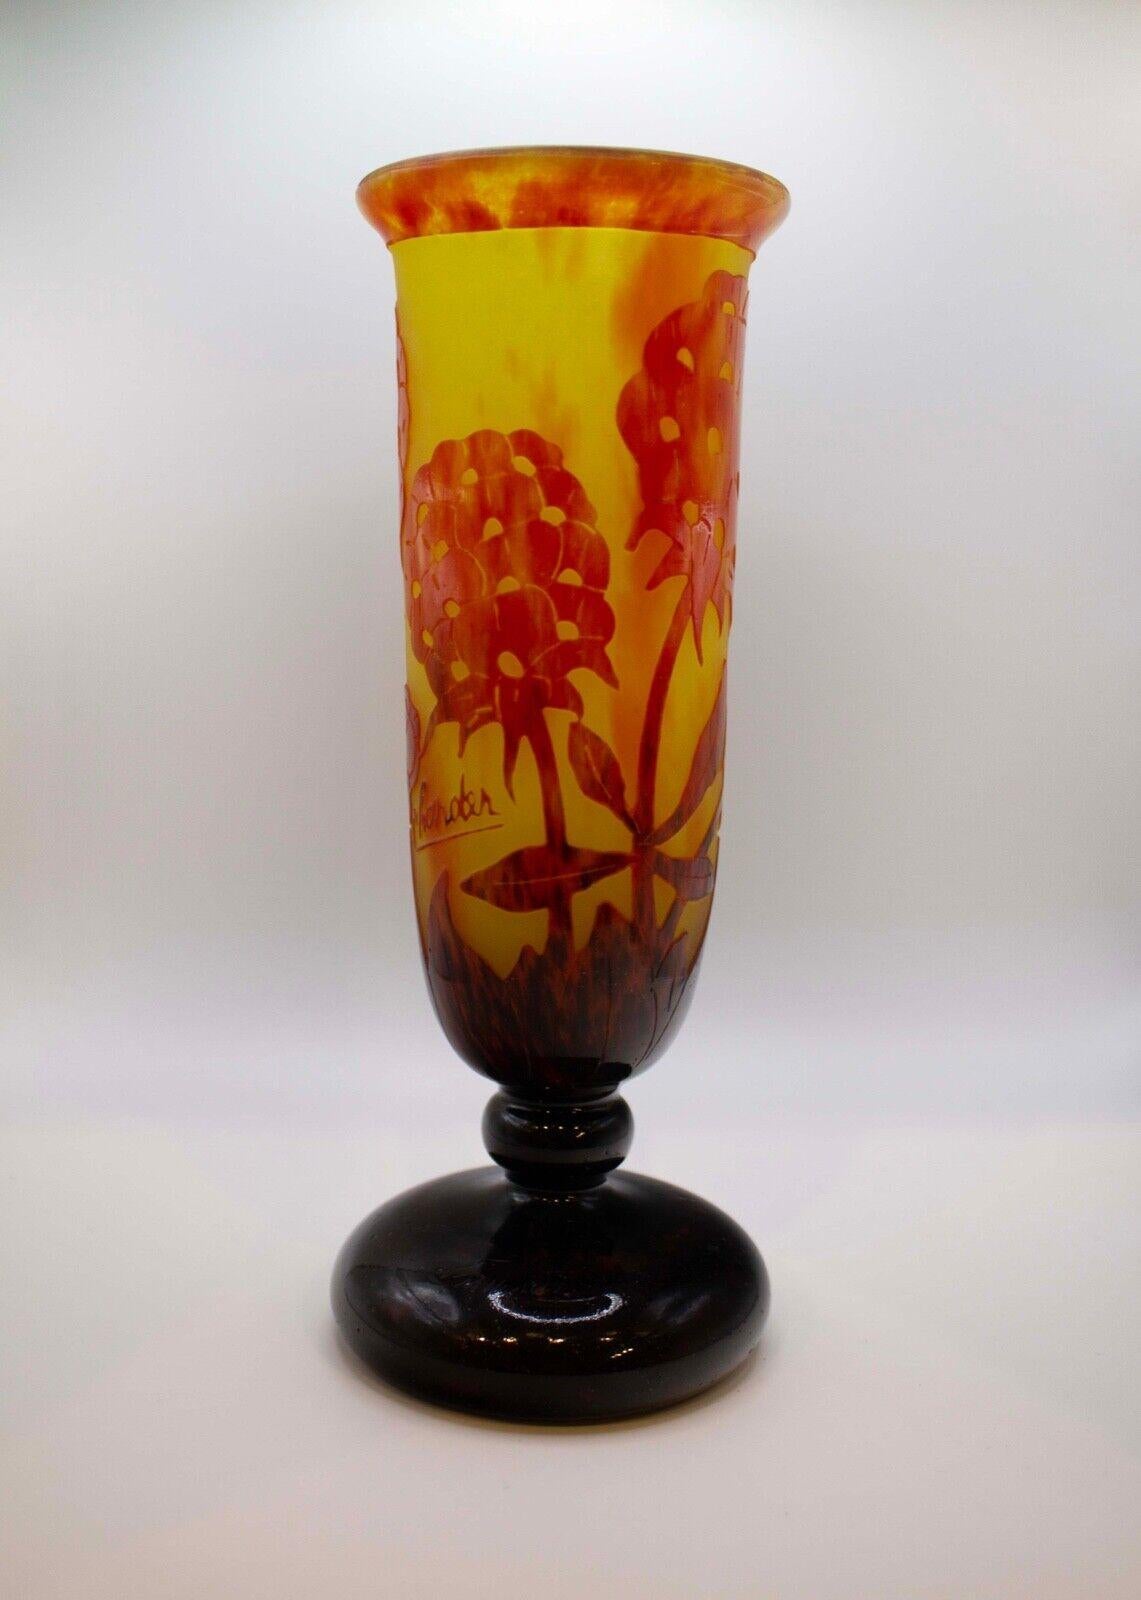 A timeless Art Nouveau acid etched cameo glass with floral design vase known as the Pivoines design by Le Verre Francais. France, circa 1925. Etched signature to top of base Charder Le Verre Français. An elegant glass design in warm colored tones.